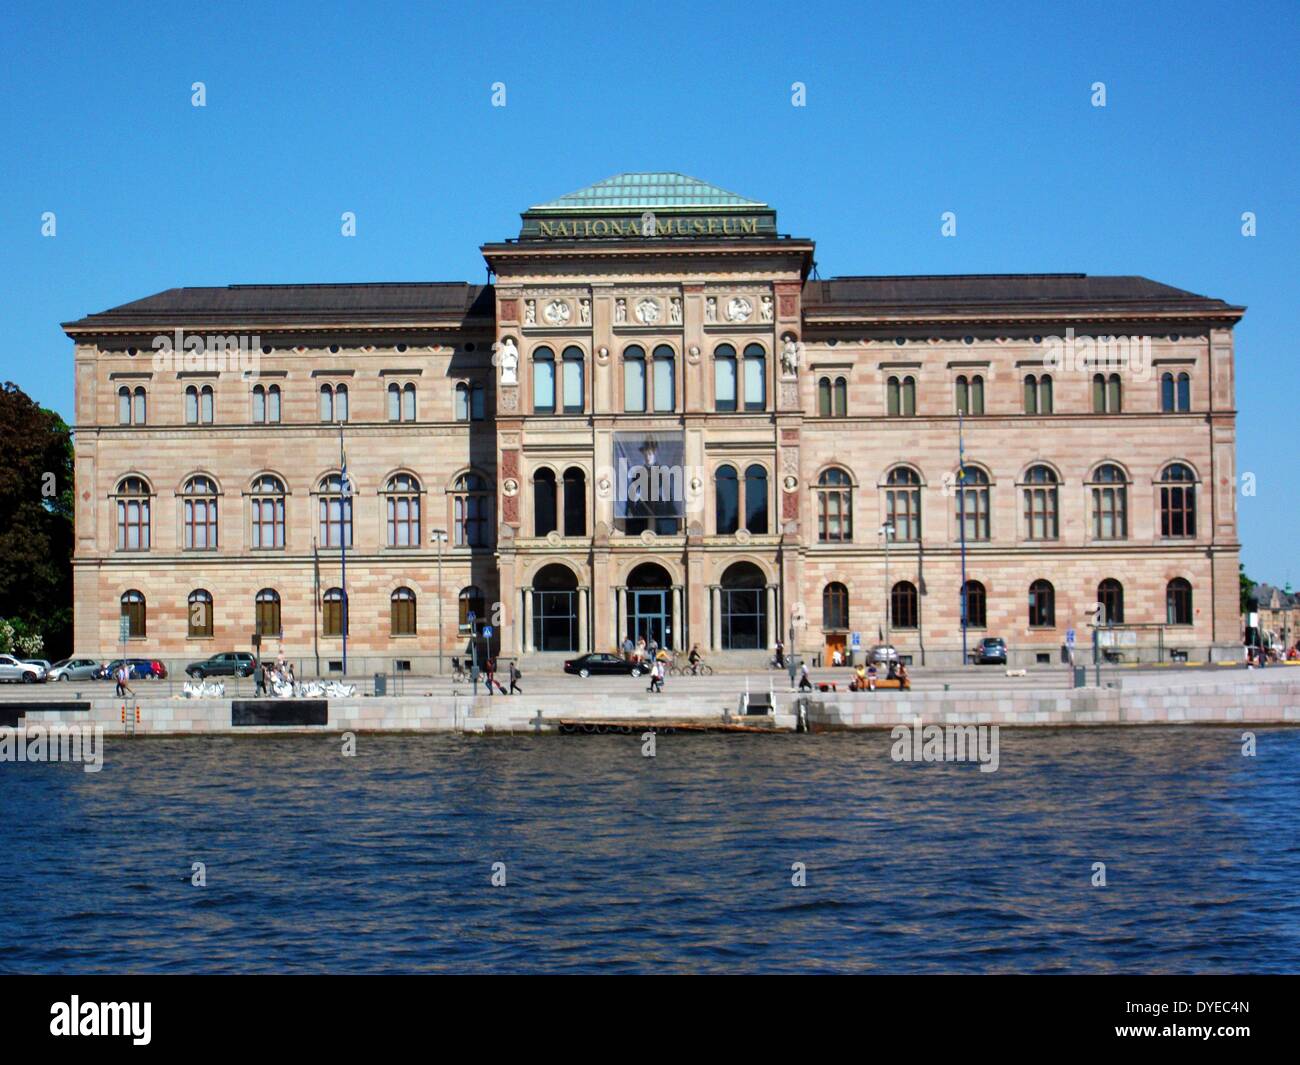 Scenic shot of a traditional building in Stockholm, Sweden. 2012-2013 Stock Photo